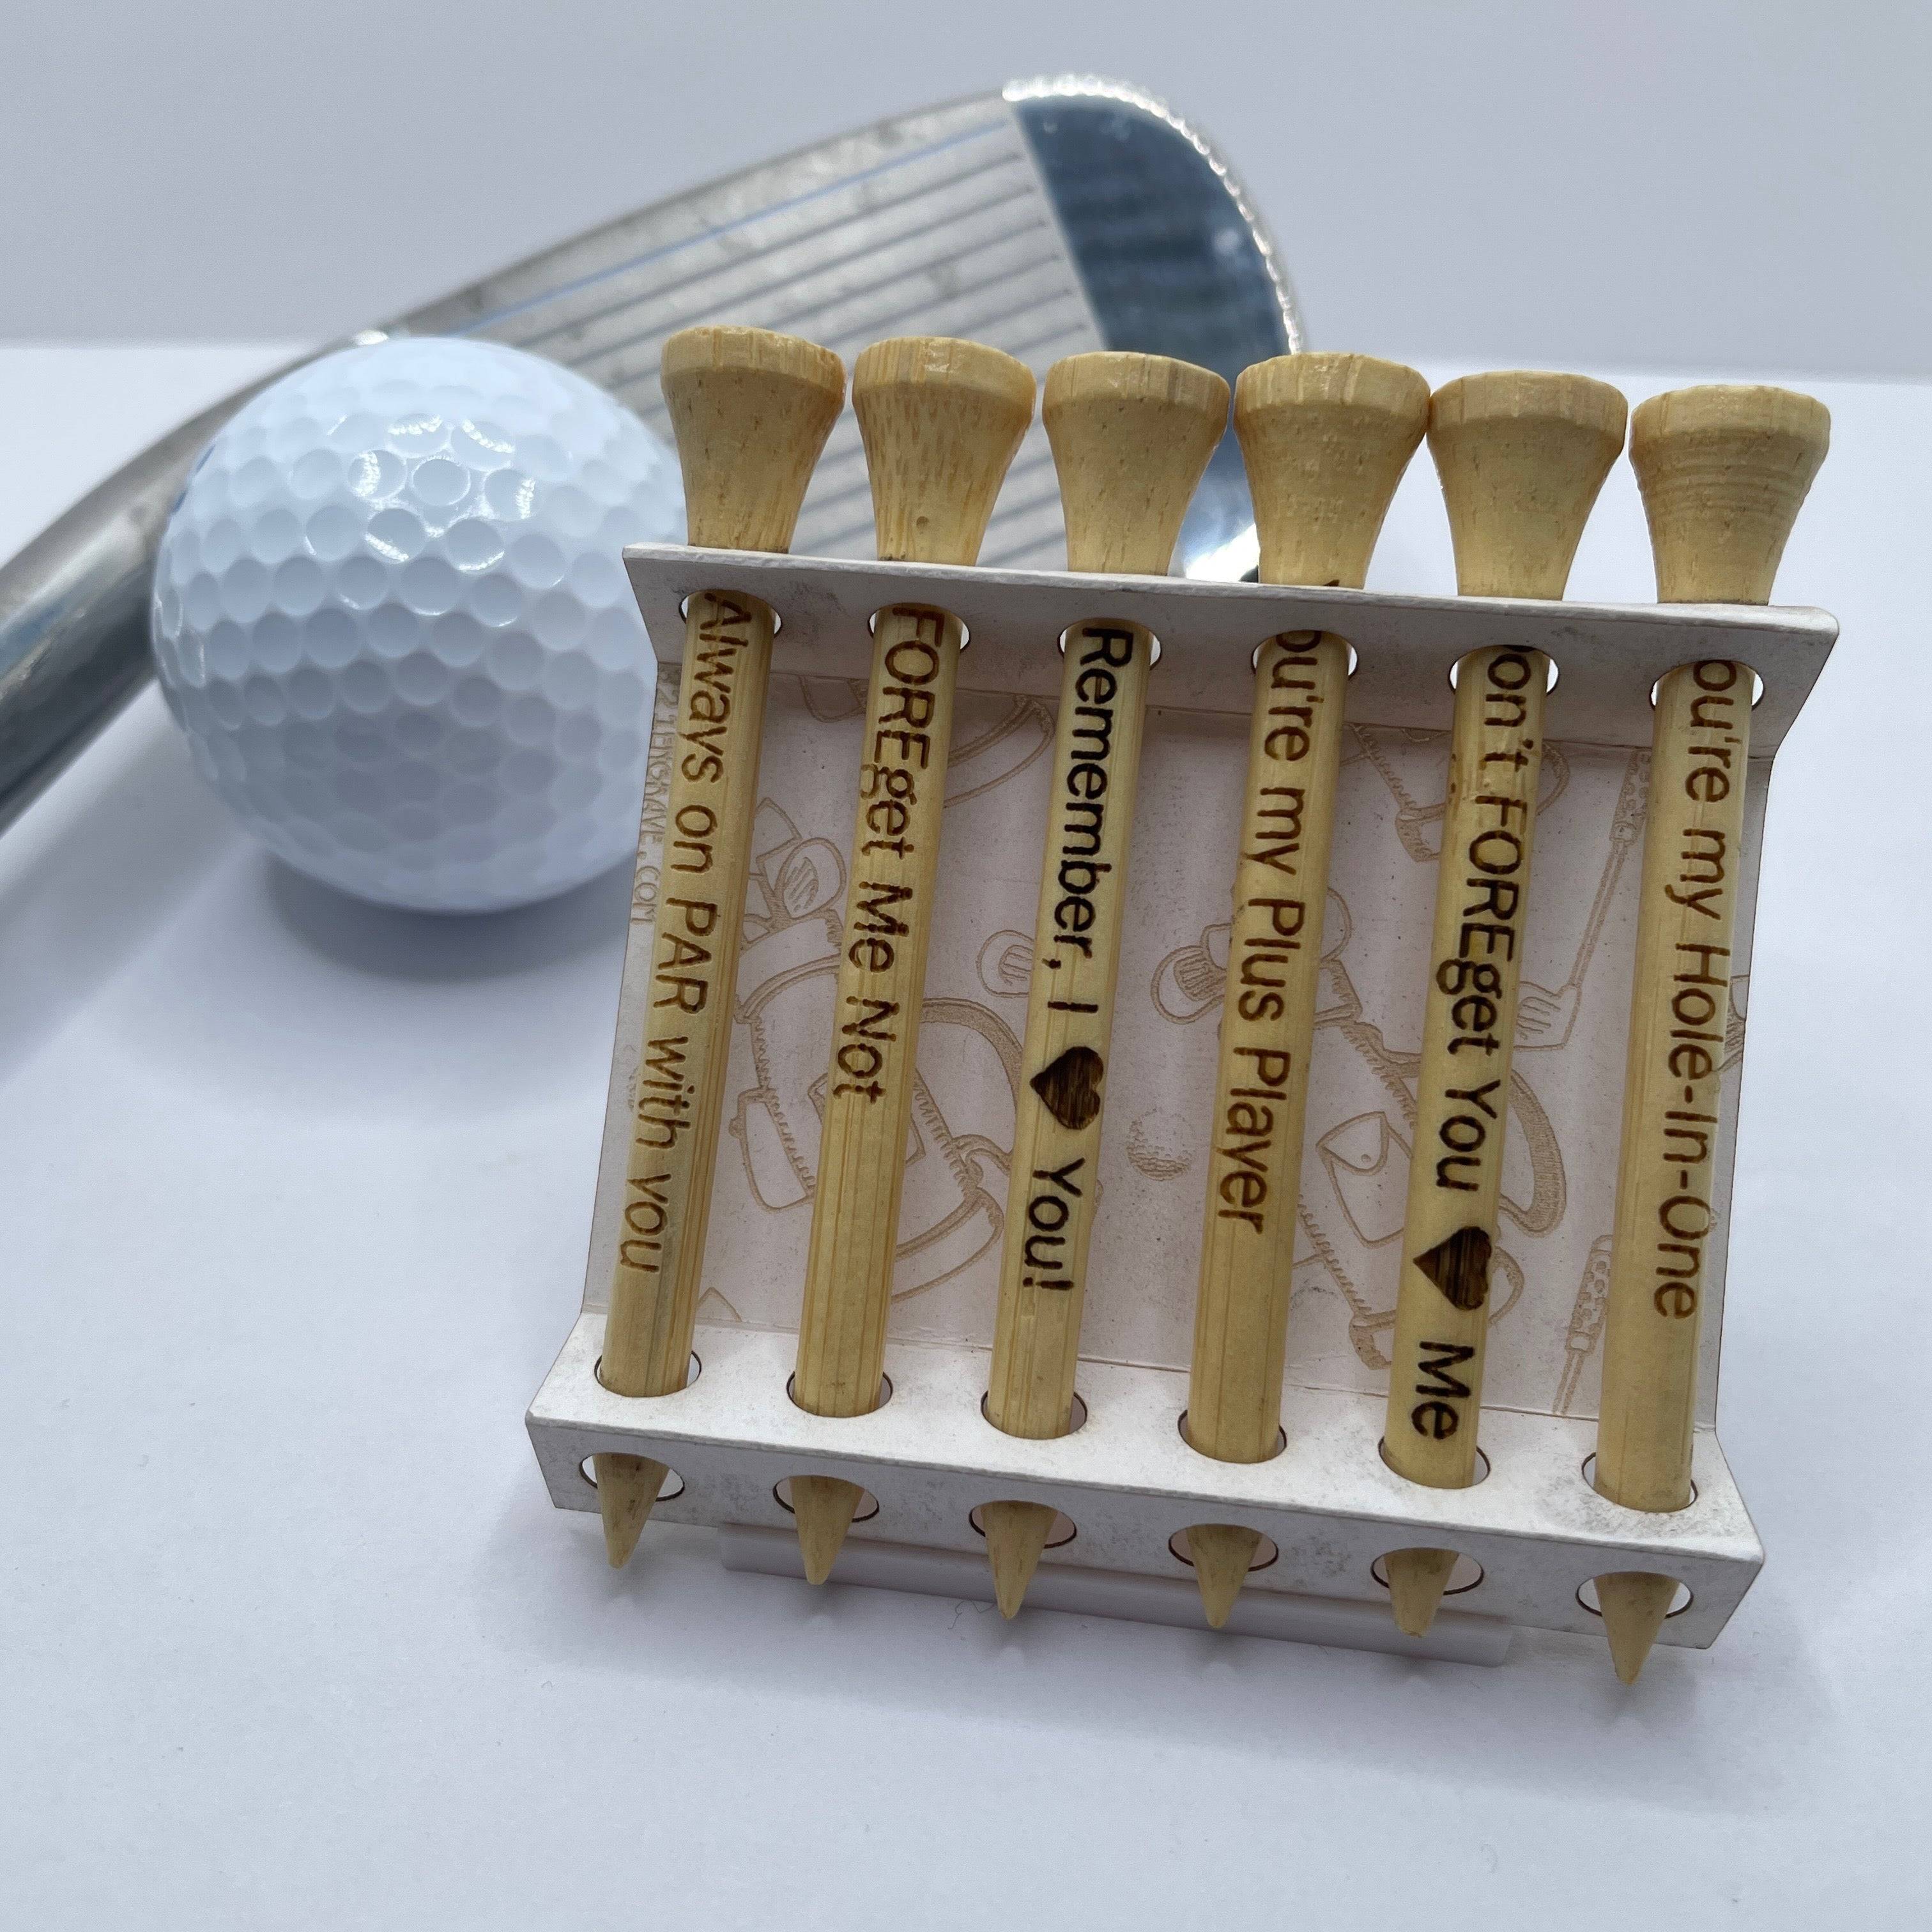 Swing into Love: Lovers Bamboo Golf Tees - Set of Six Gift for Boyfriend or Girlfriend